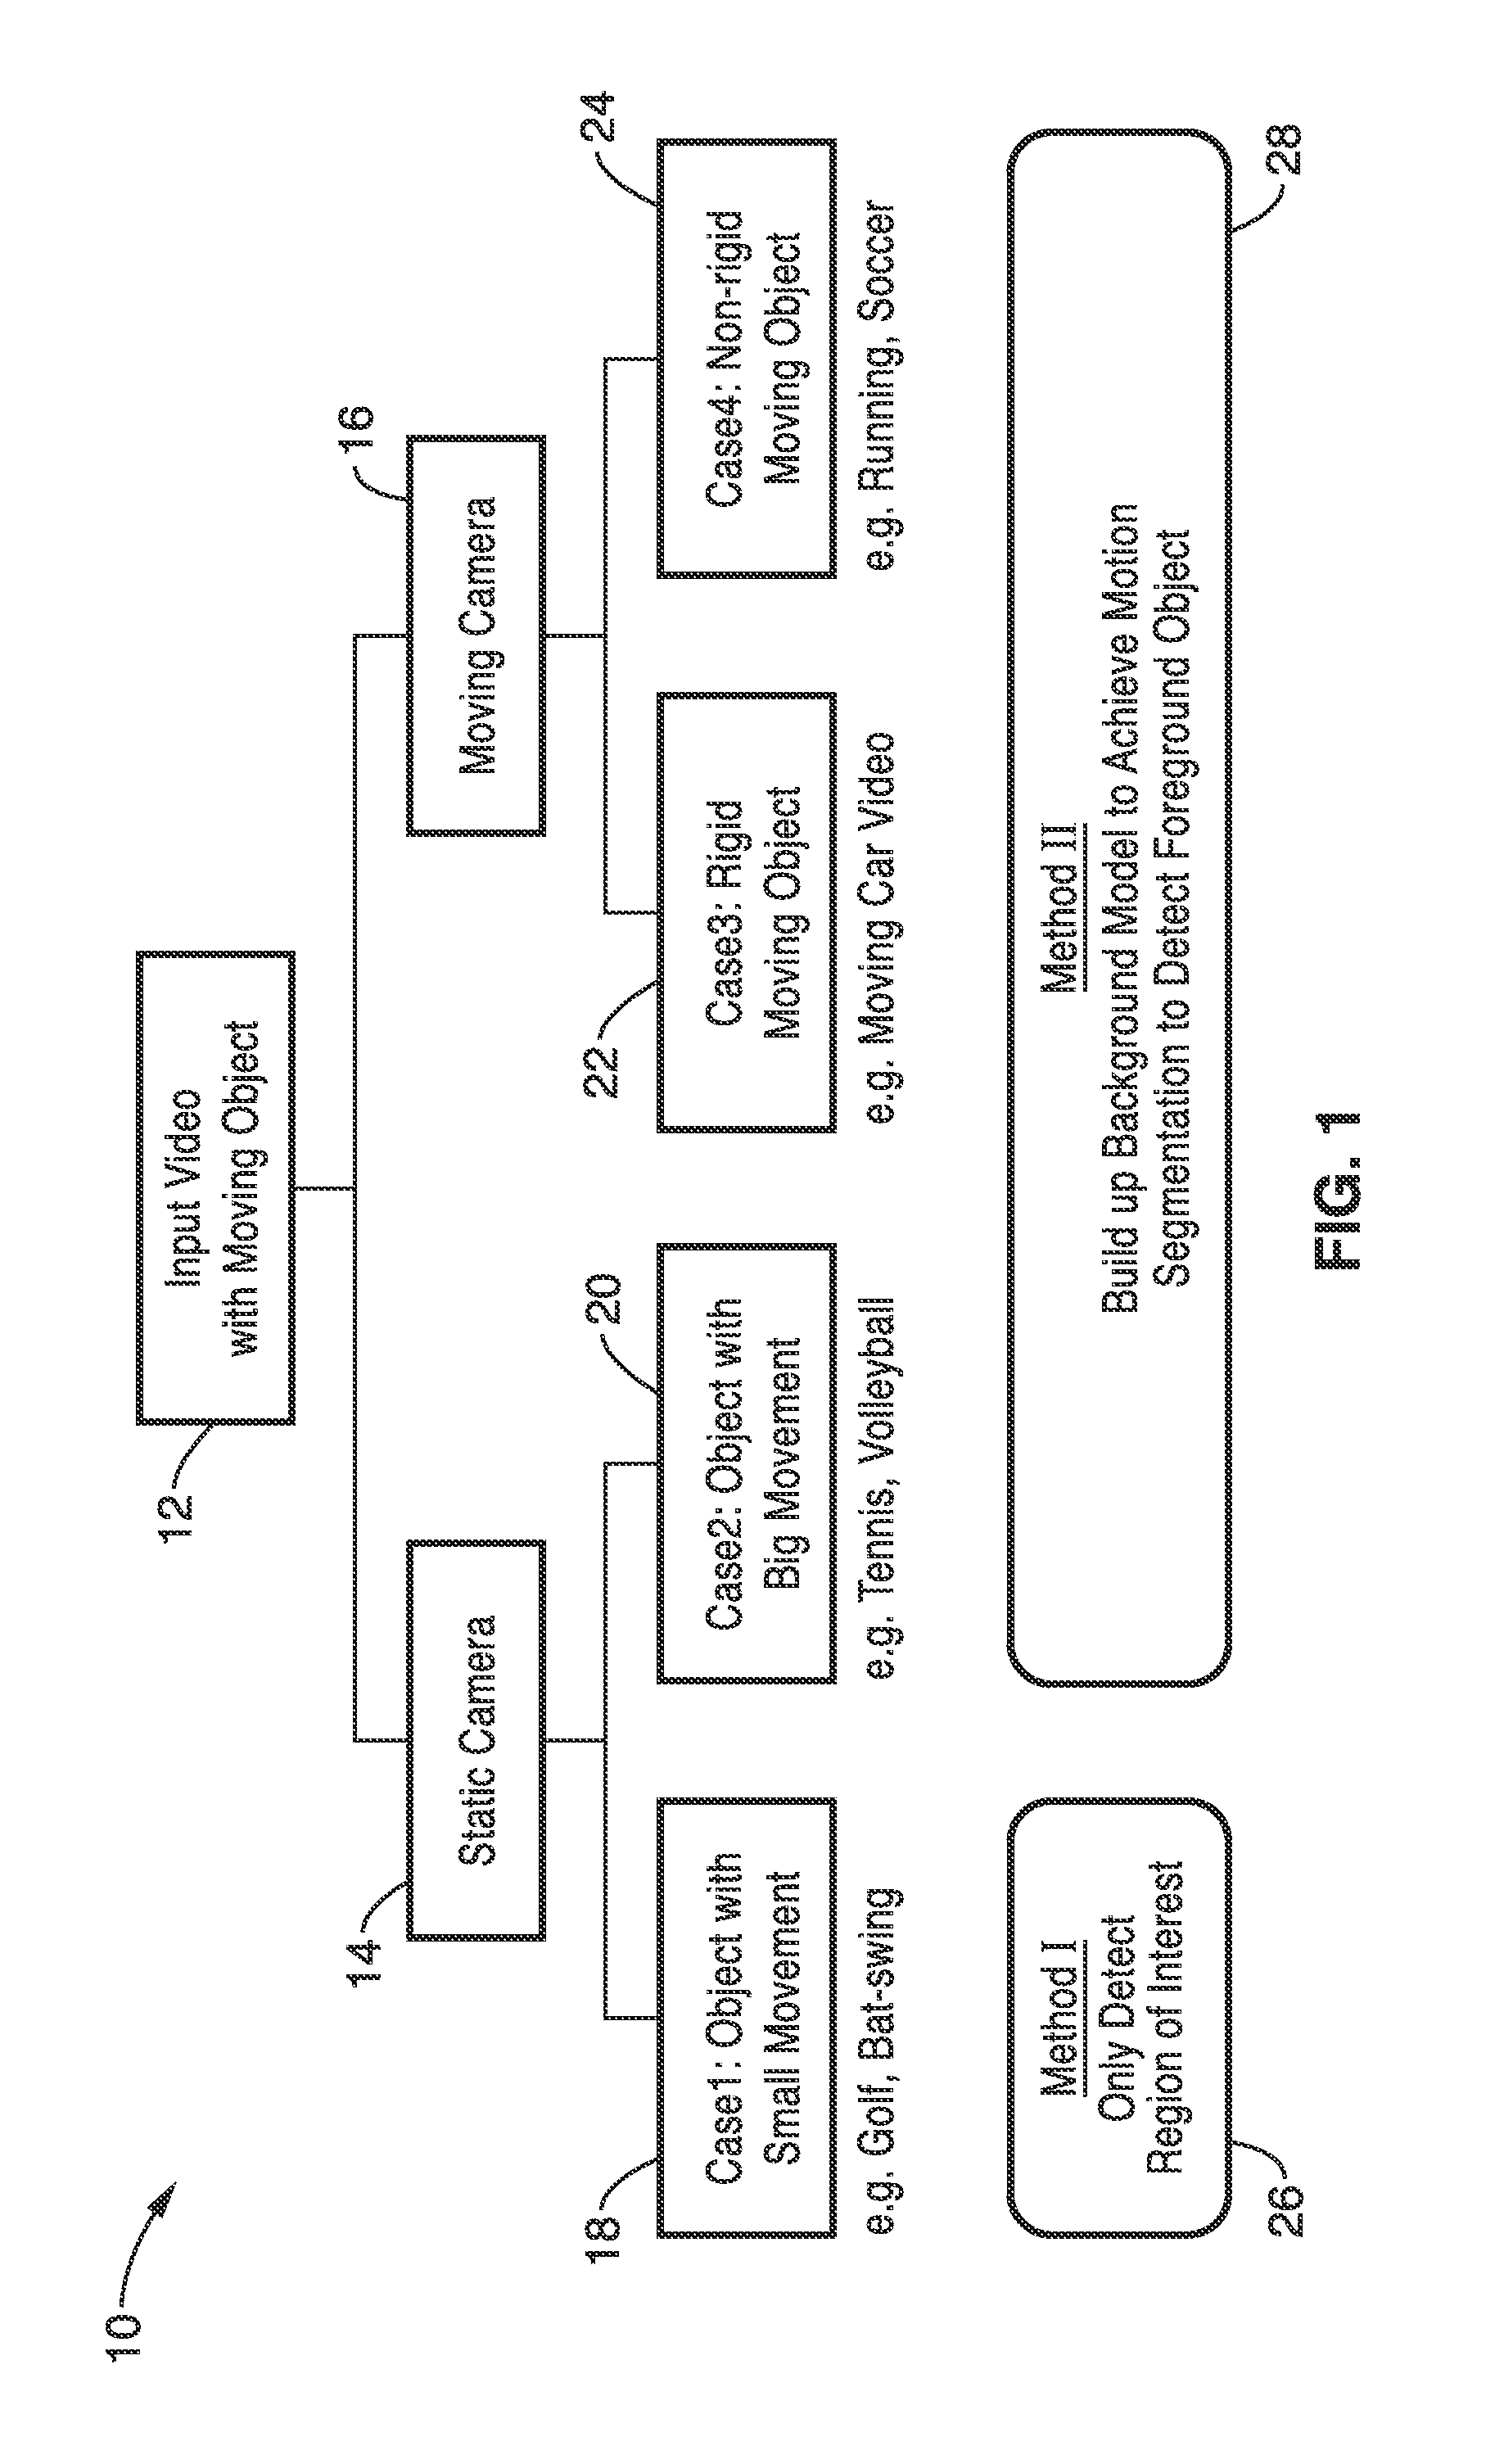 Tail the motion method of generating simulated strobe motion videos and pictures using image cloning